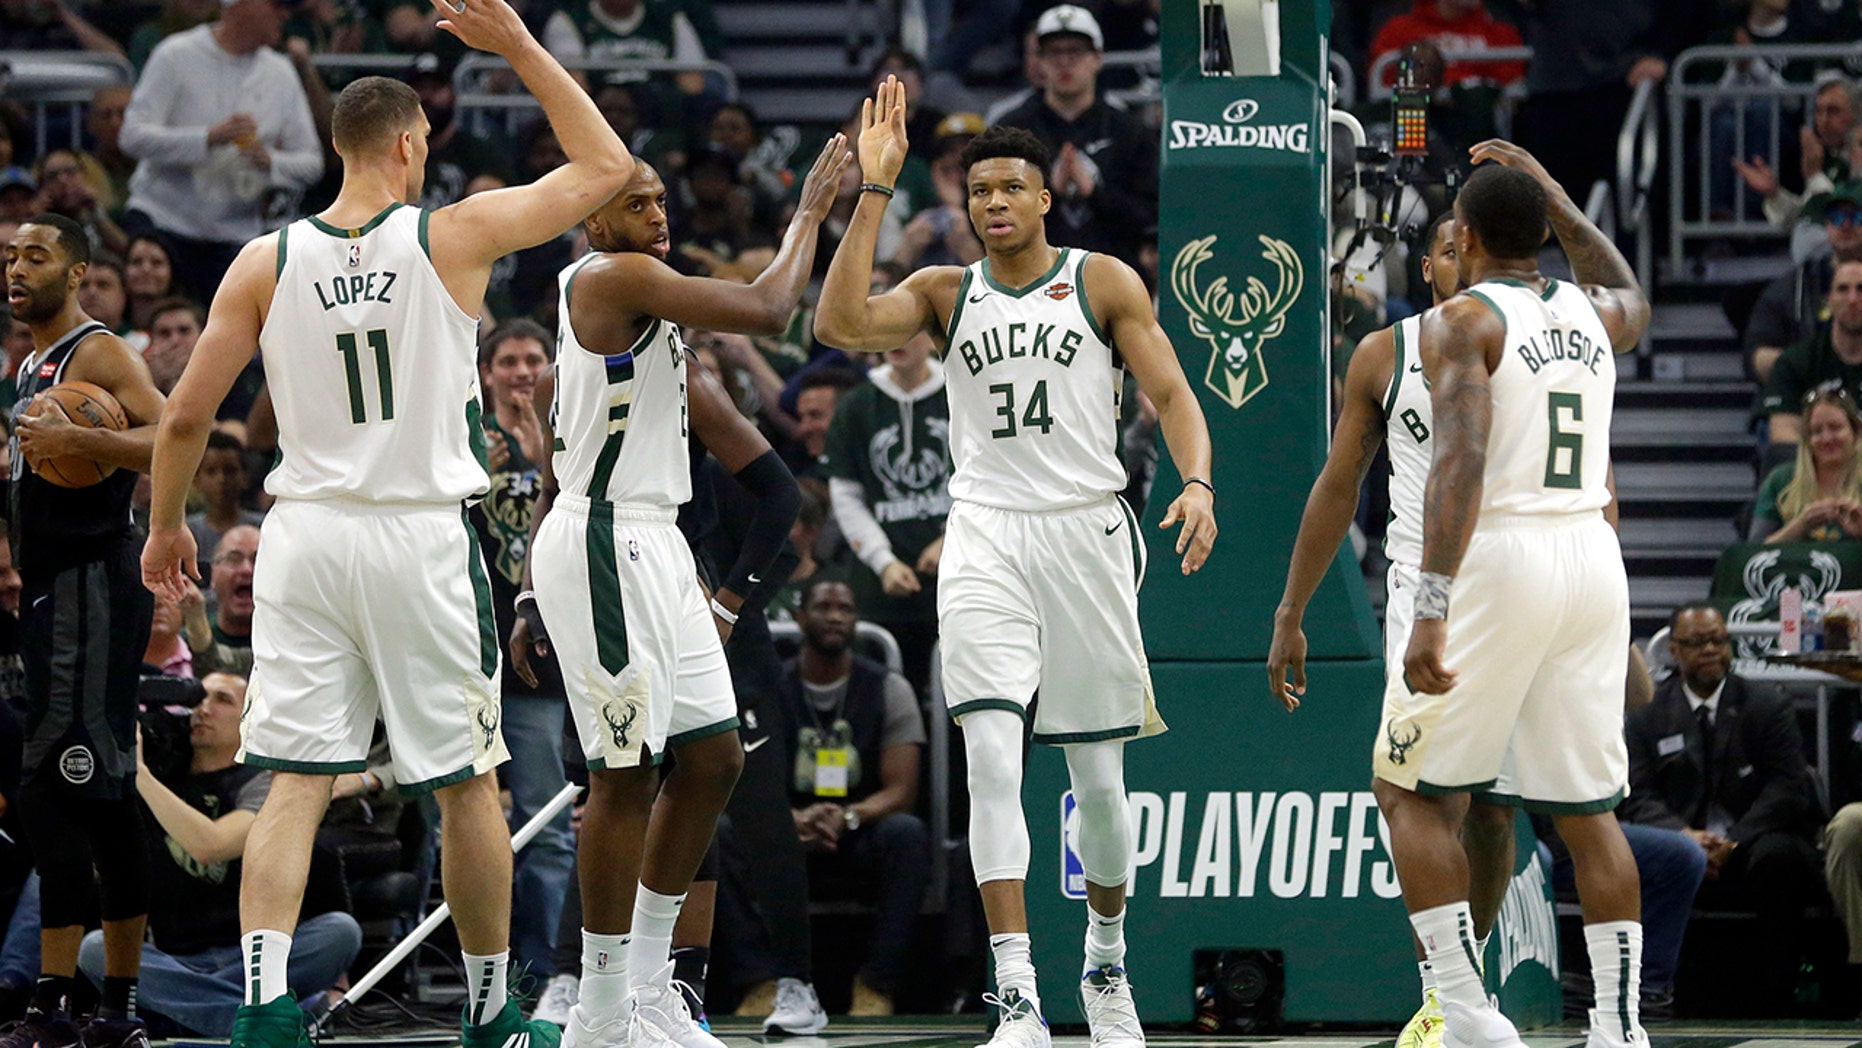 Milwaukee Bucks' Giannis Antetokounmpo gives high-fives to his teammates during the first half of Game 2 of an NBA basketball first-round playoff series against the Detroit Pistons on Wednesday, April 17, 2019, in Milwaukee. (AP Photo/Aaron Gash)